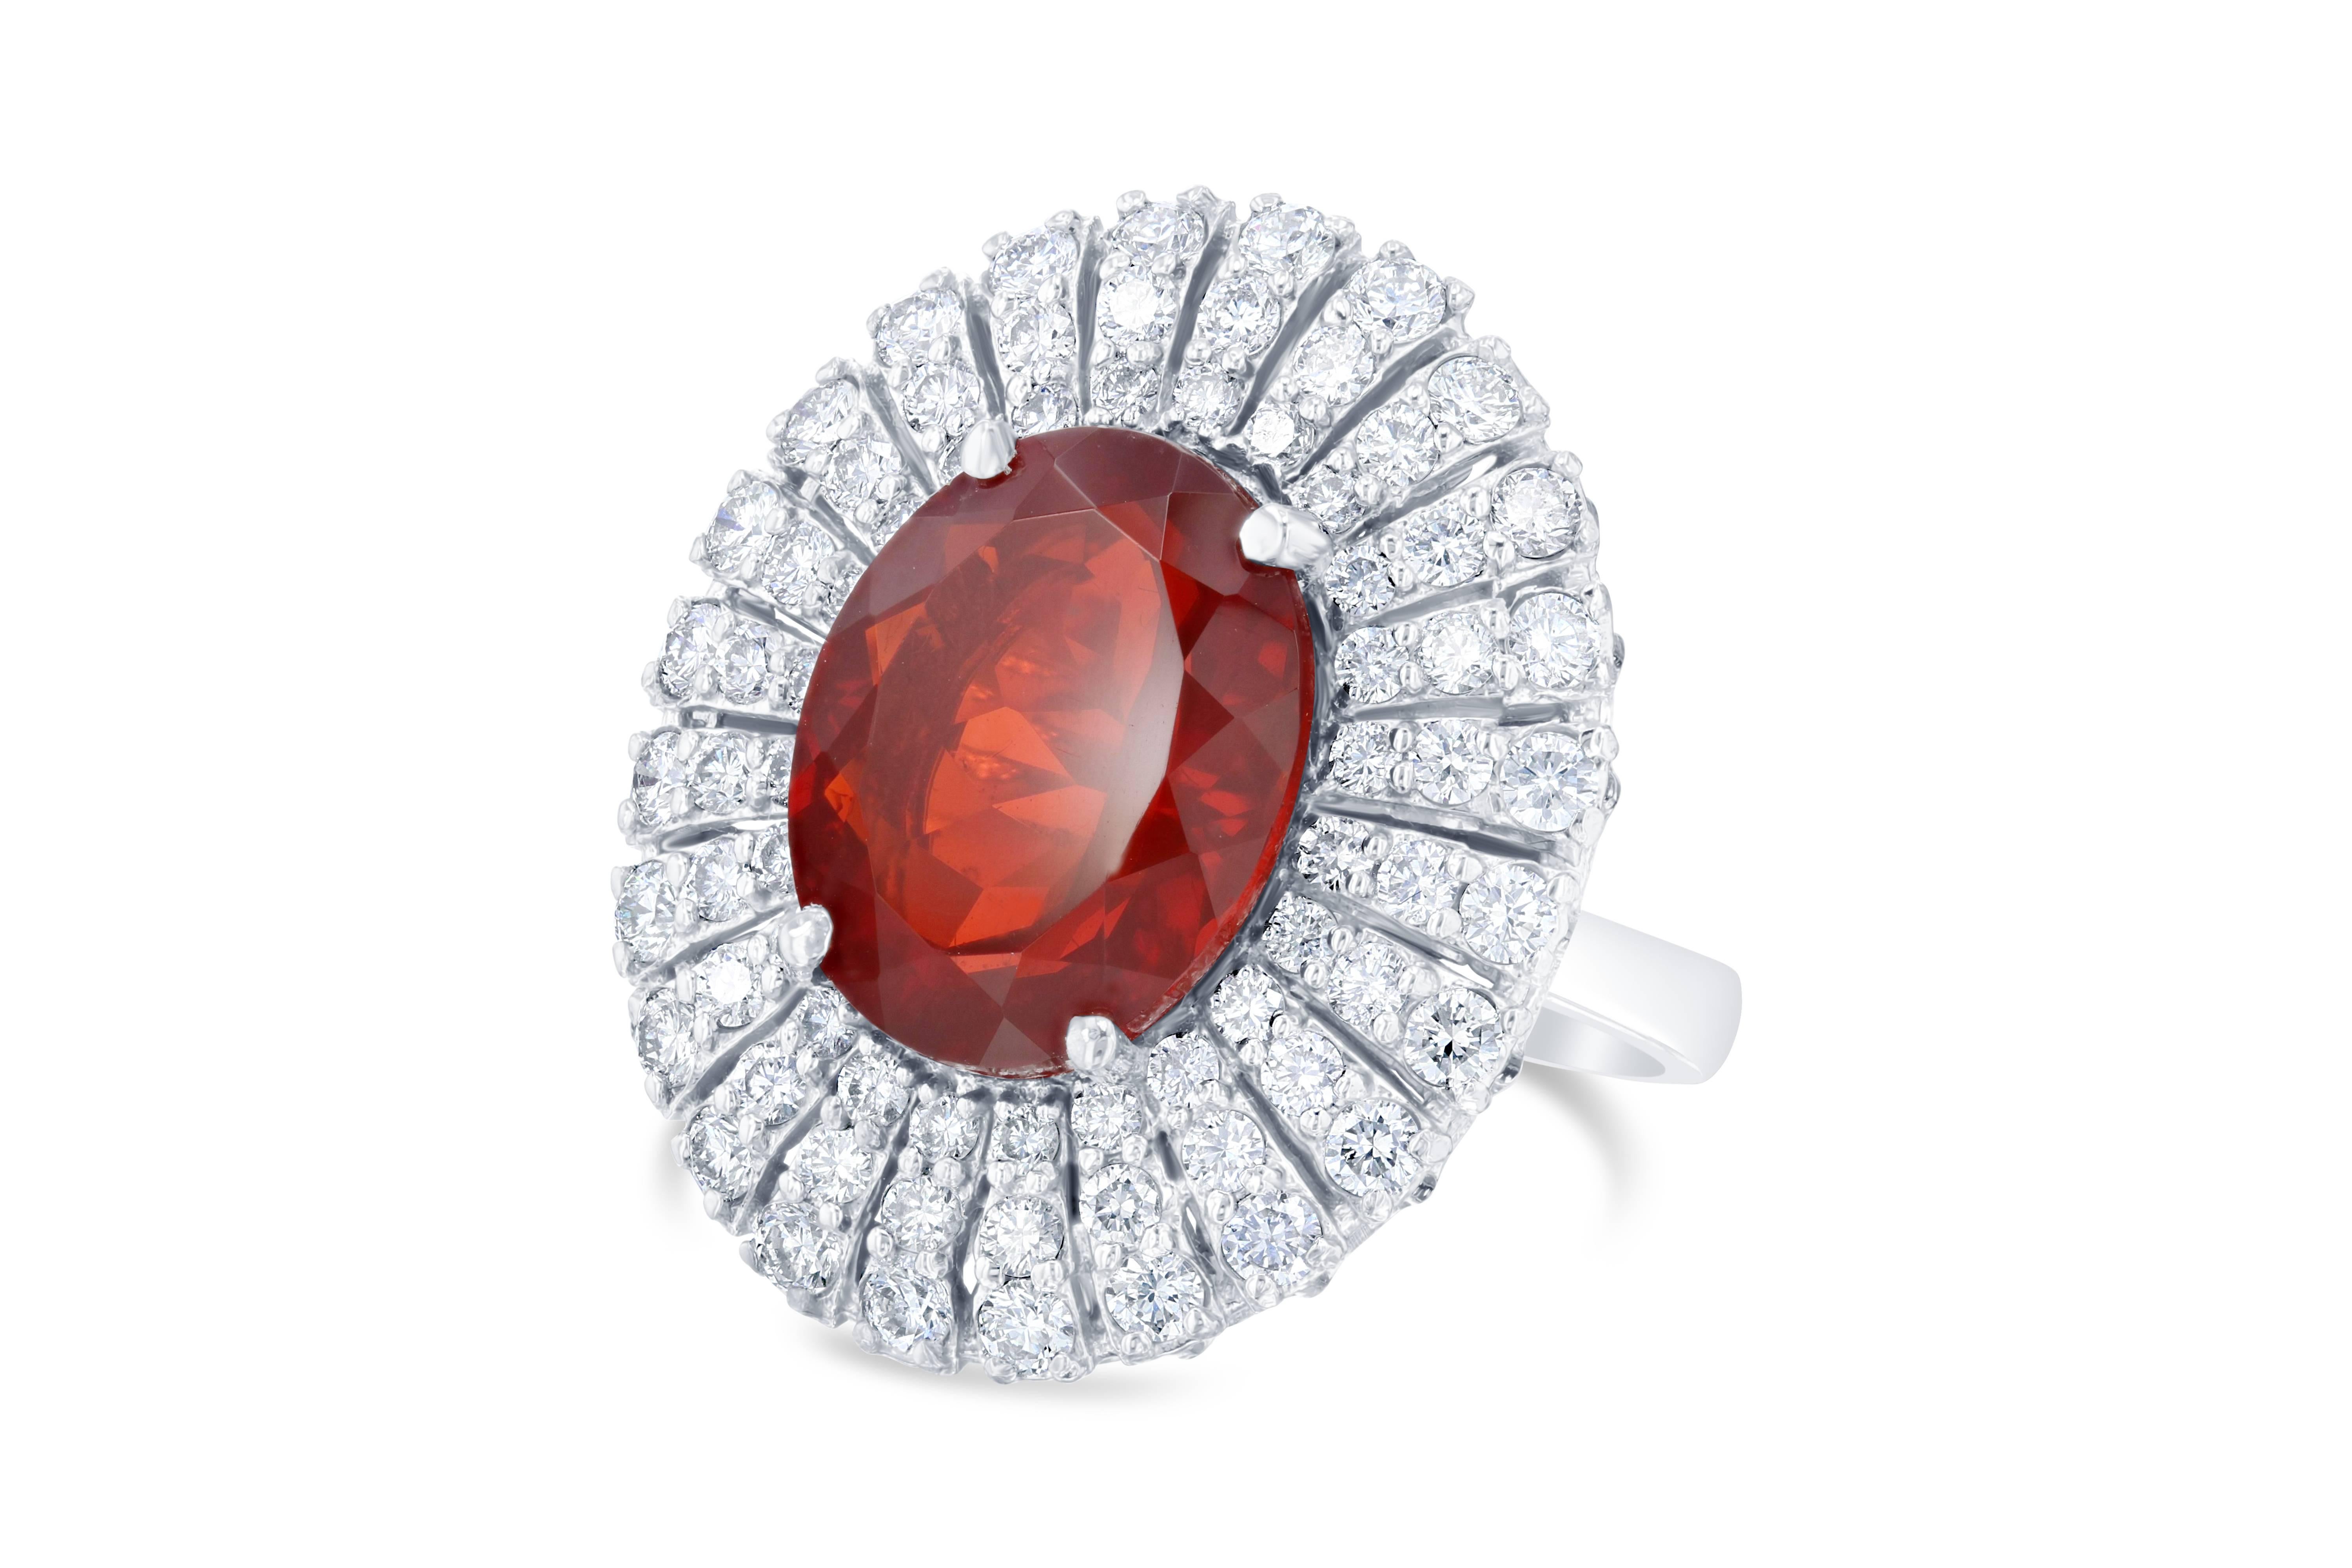 A real SHOW STOPPER!!  This ring has a gorgeous 5.10 carat Fire Opal in the center of the ring and is surrounded by 72 Round Brilliant Cut Diamonds that weigh a total of 1.71 carats.  The Clarity is a VS and the Color is H.  The ring is casted in